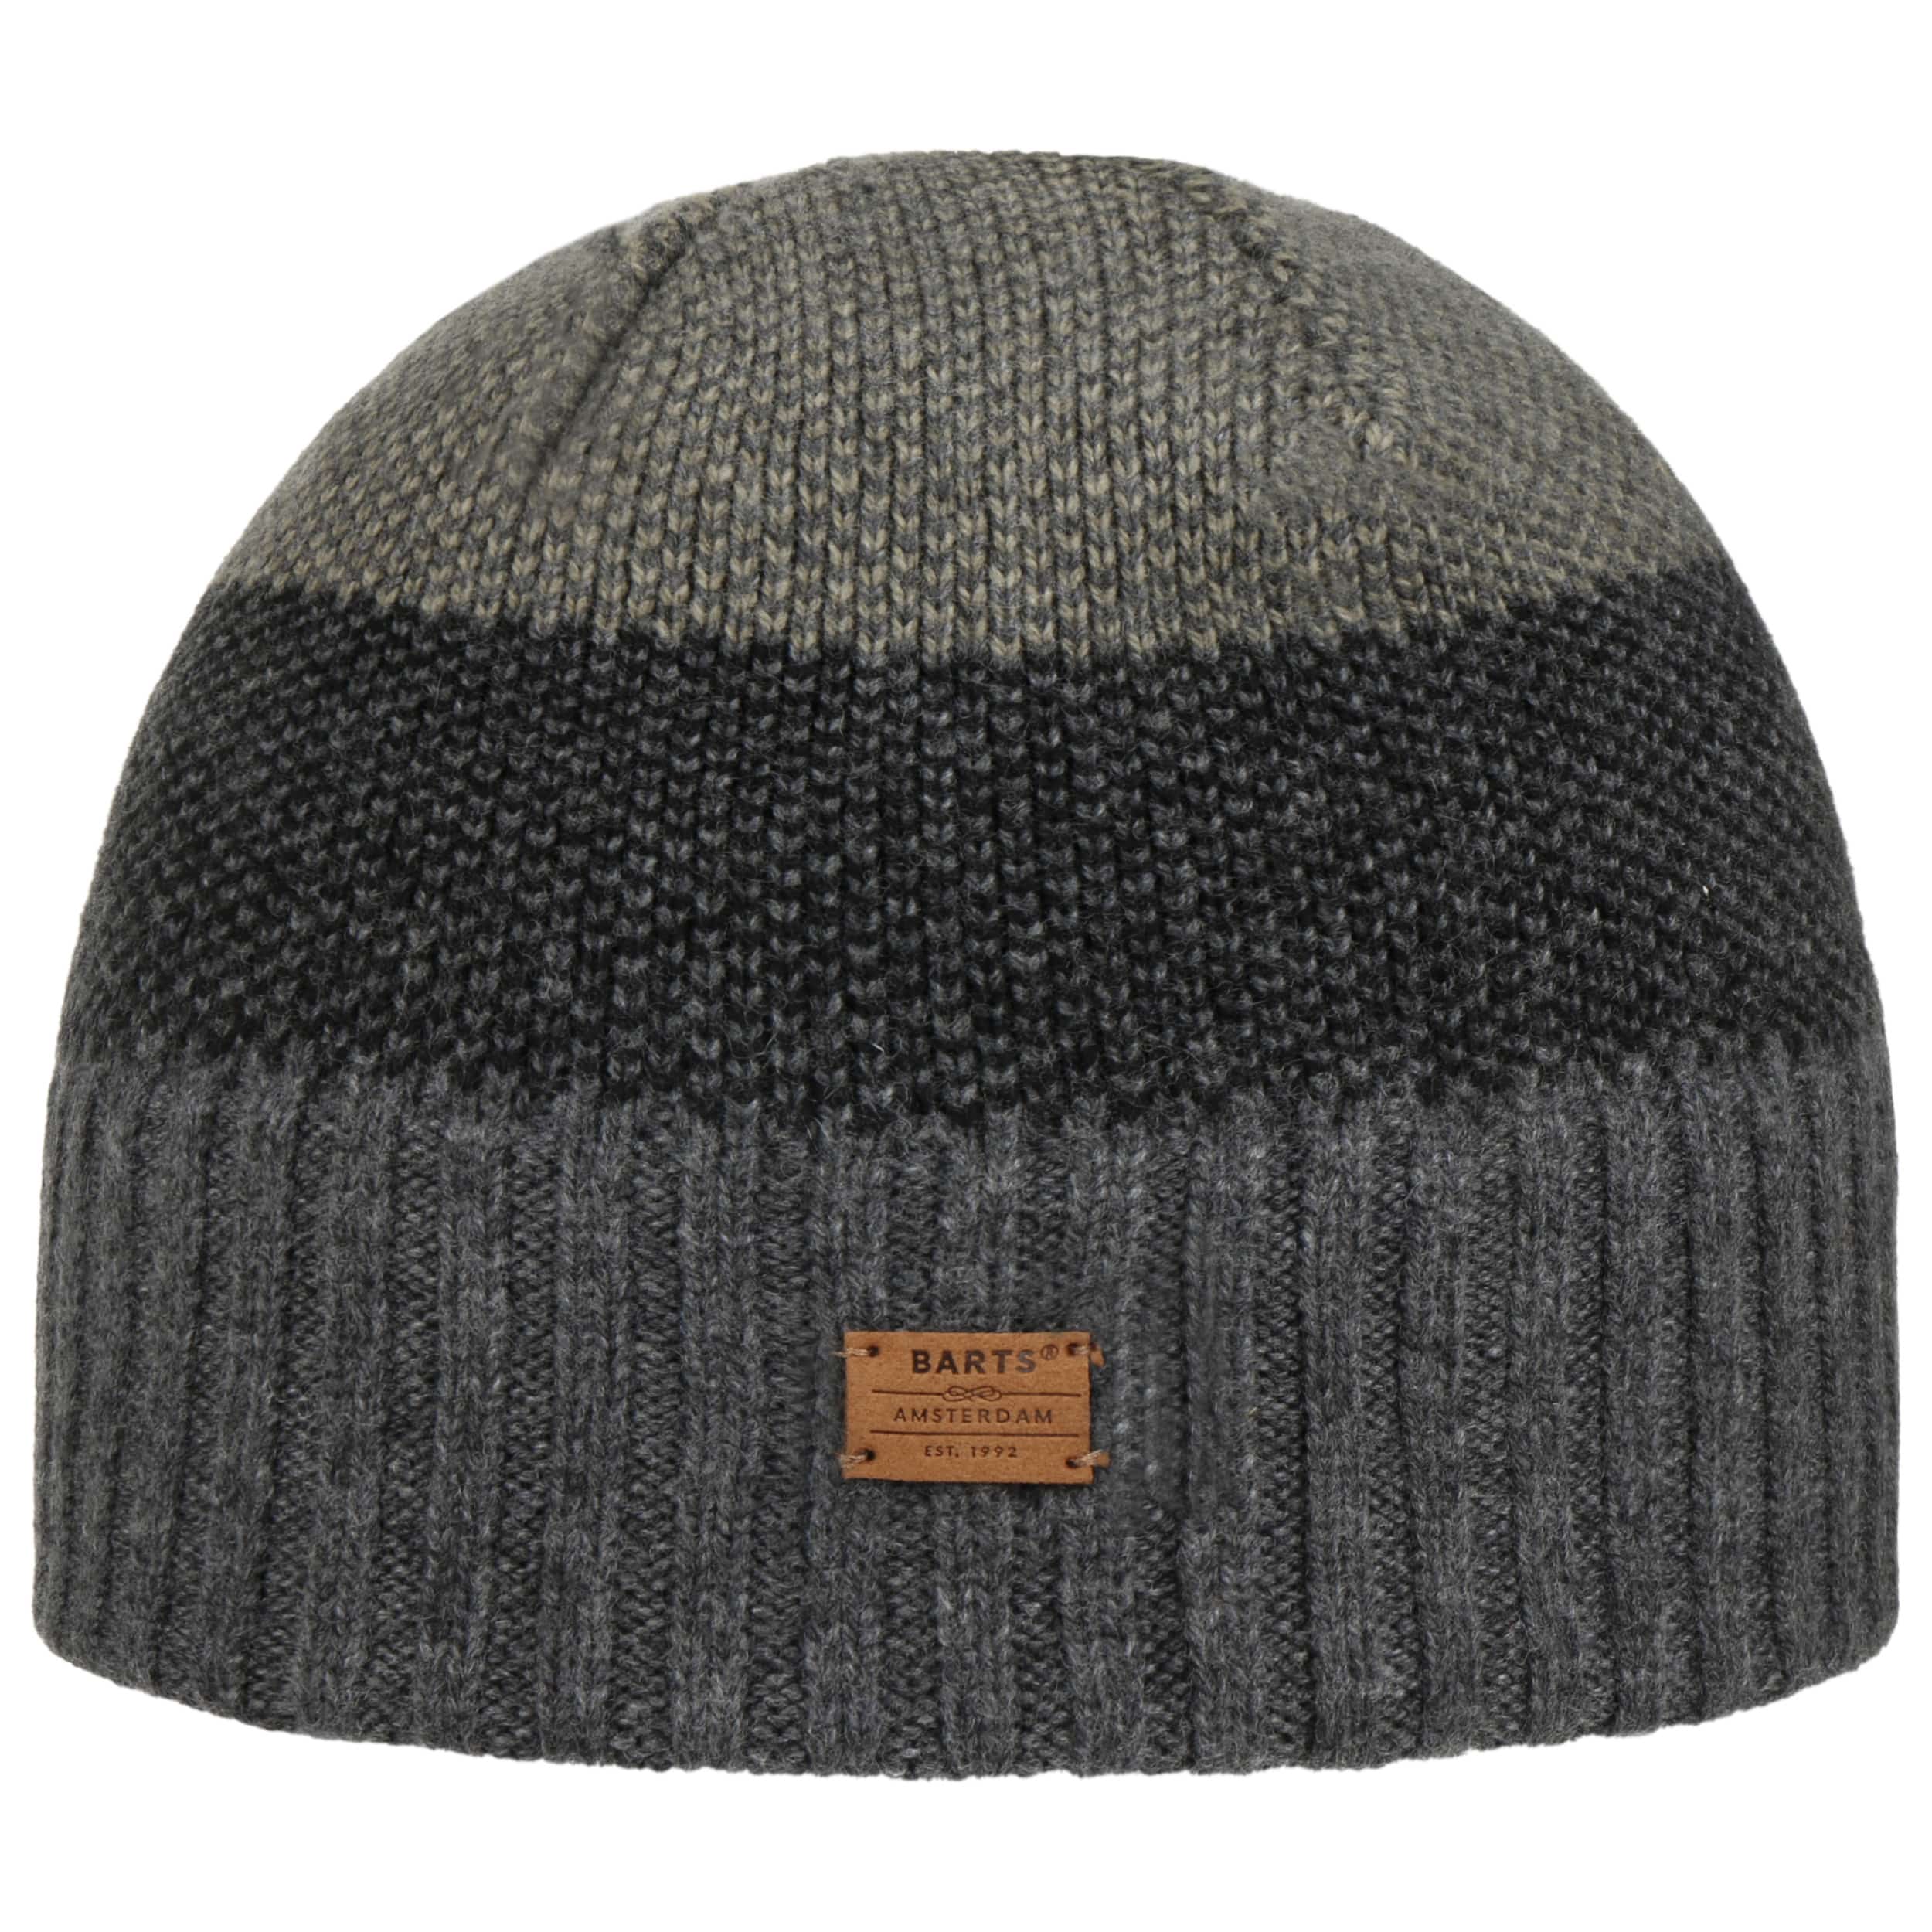 Cotton Beanie Muts by Barts - €